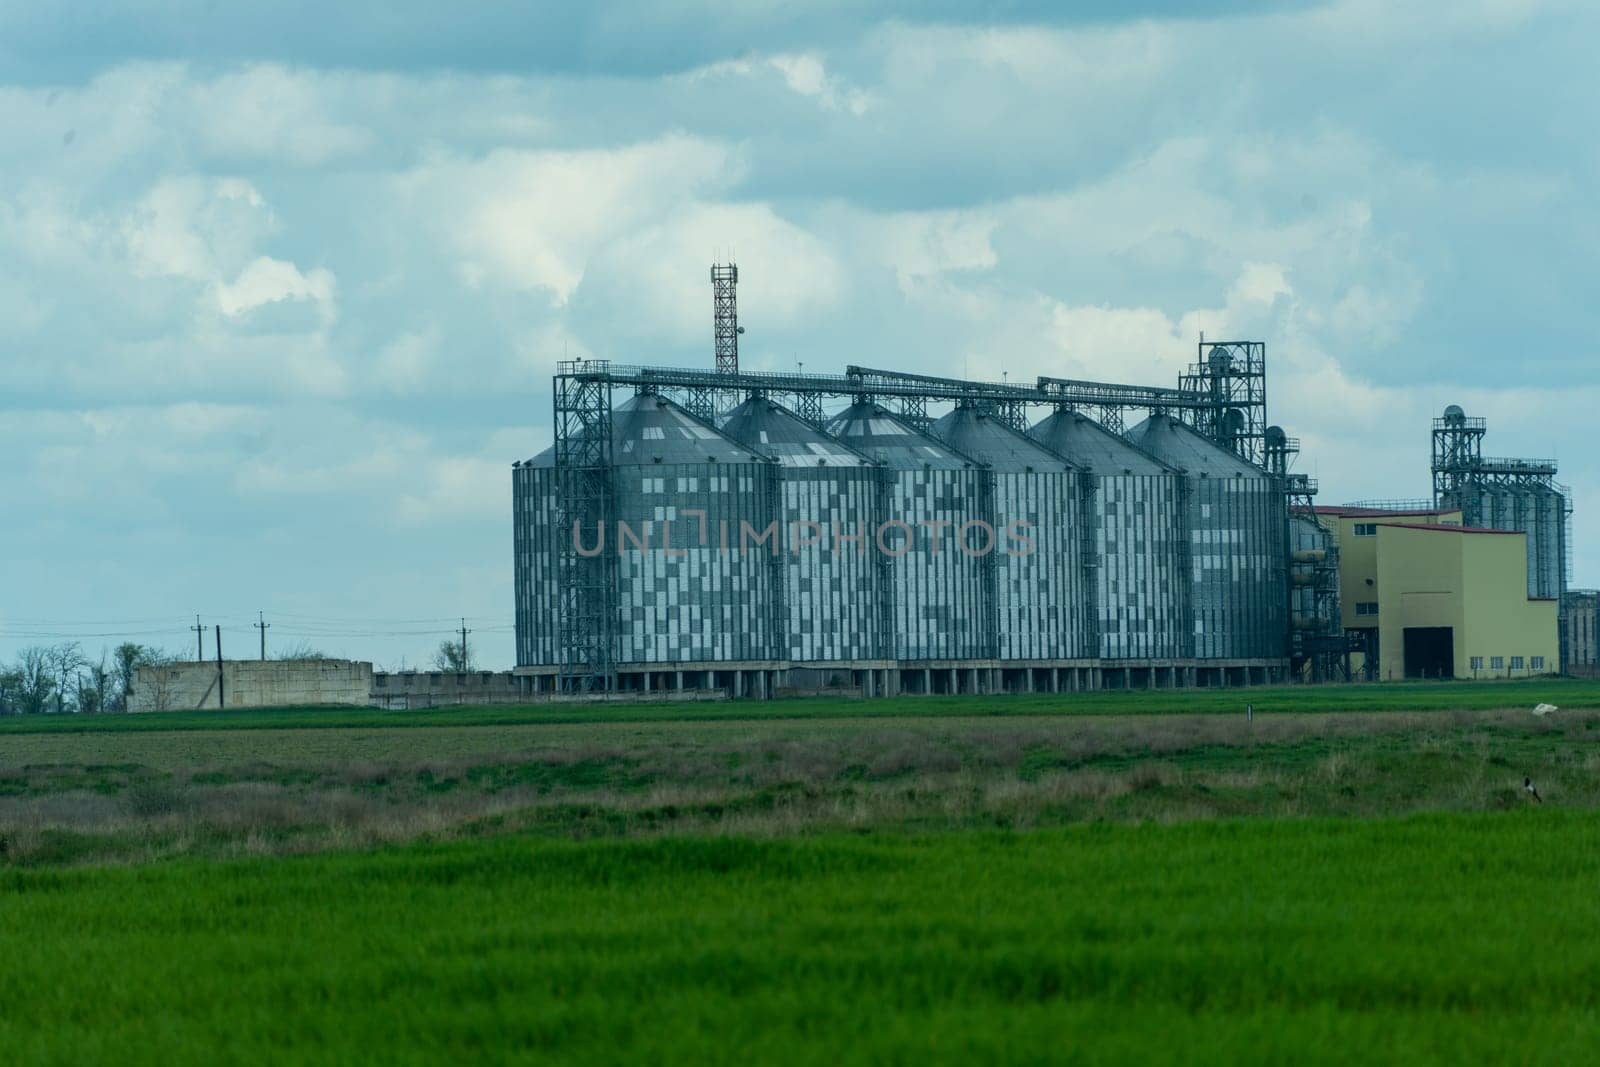 Granary elevator, silver silos on agro manufacturing plant for processing drying cleaning and storage of agricultural products, flour, cereals and grain. A field of green wheat